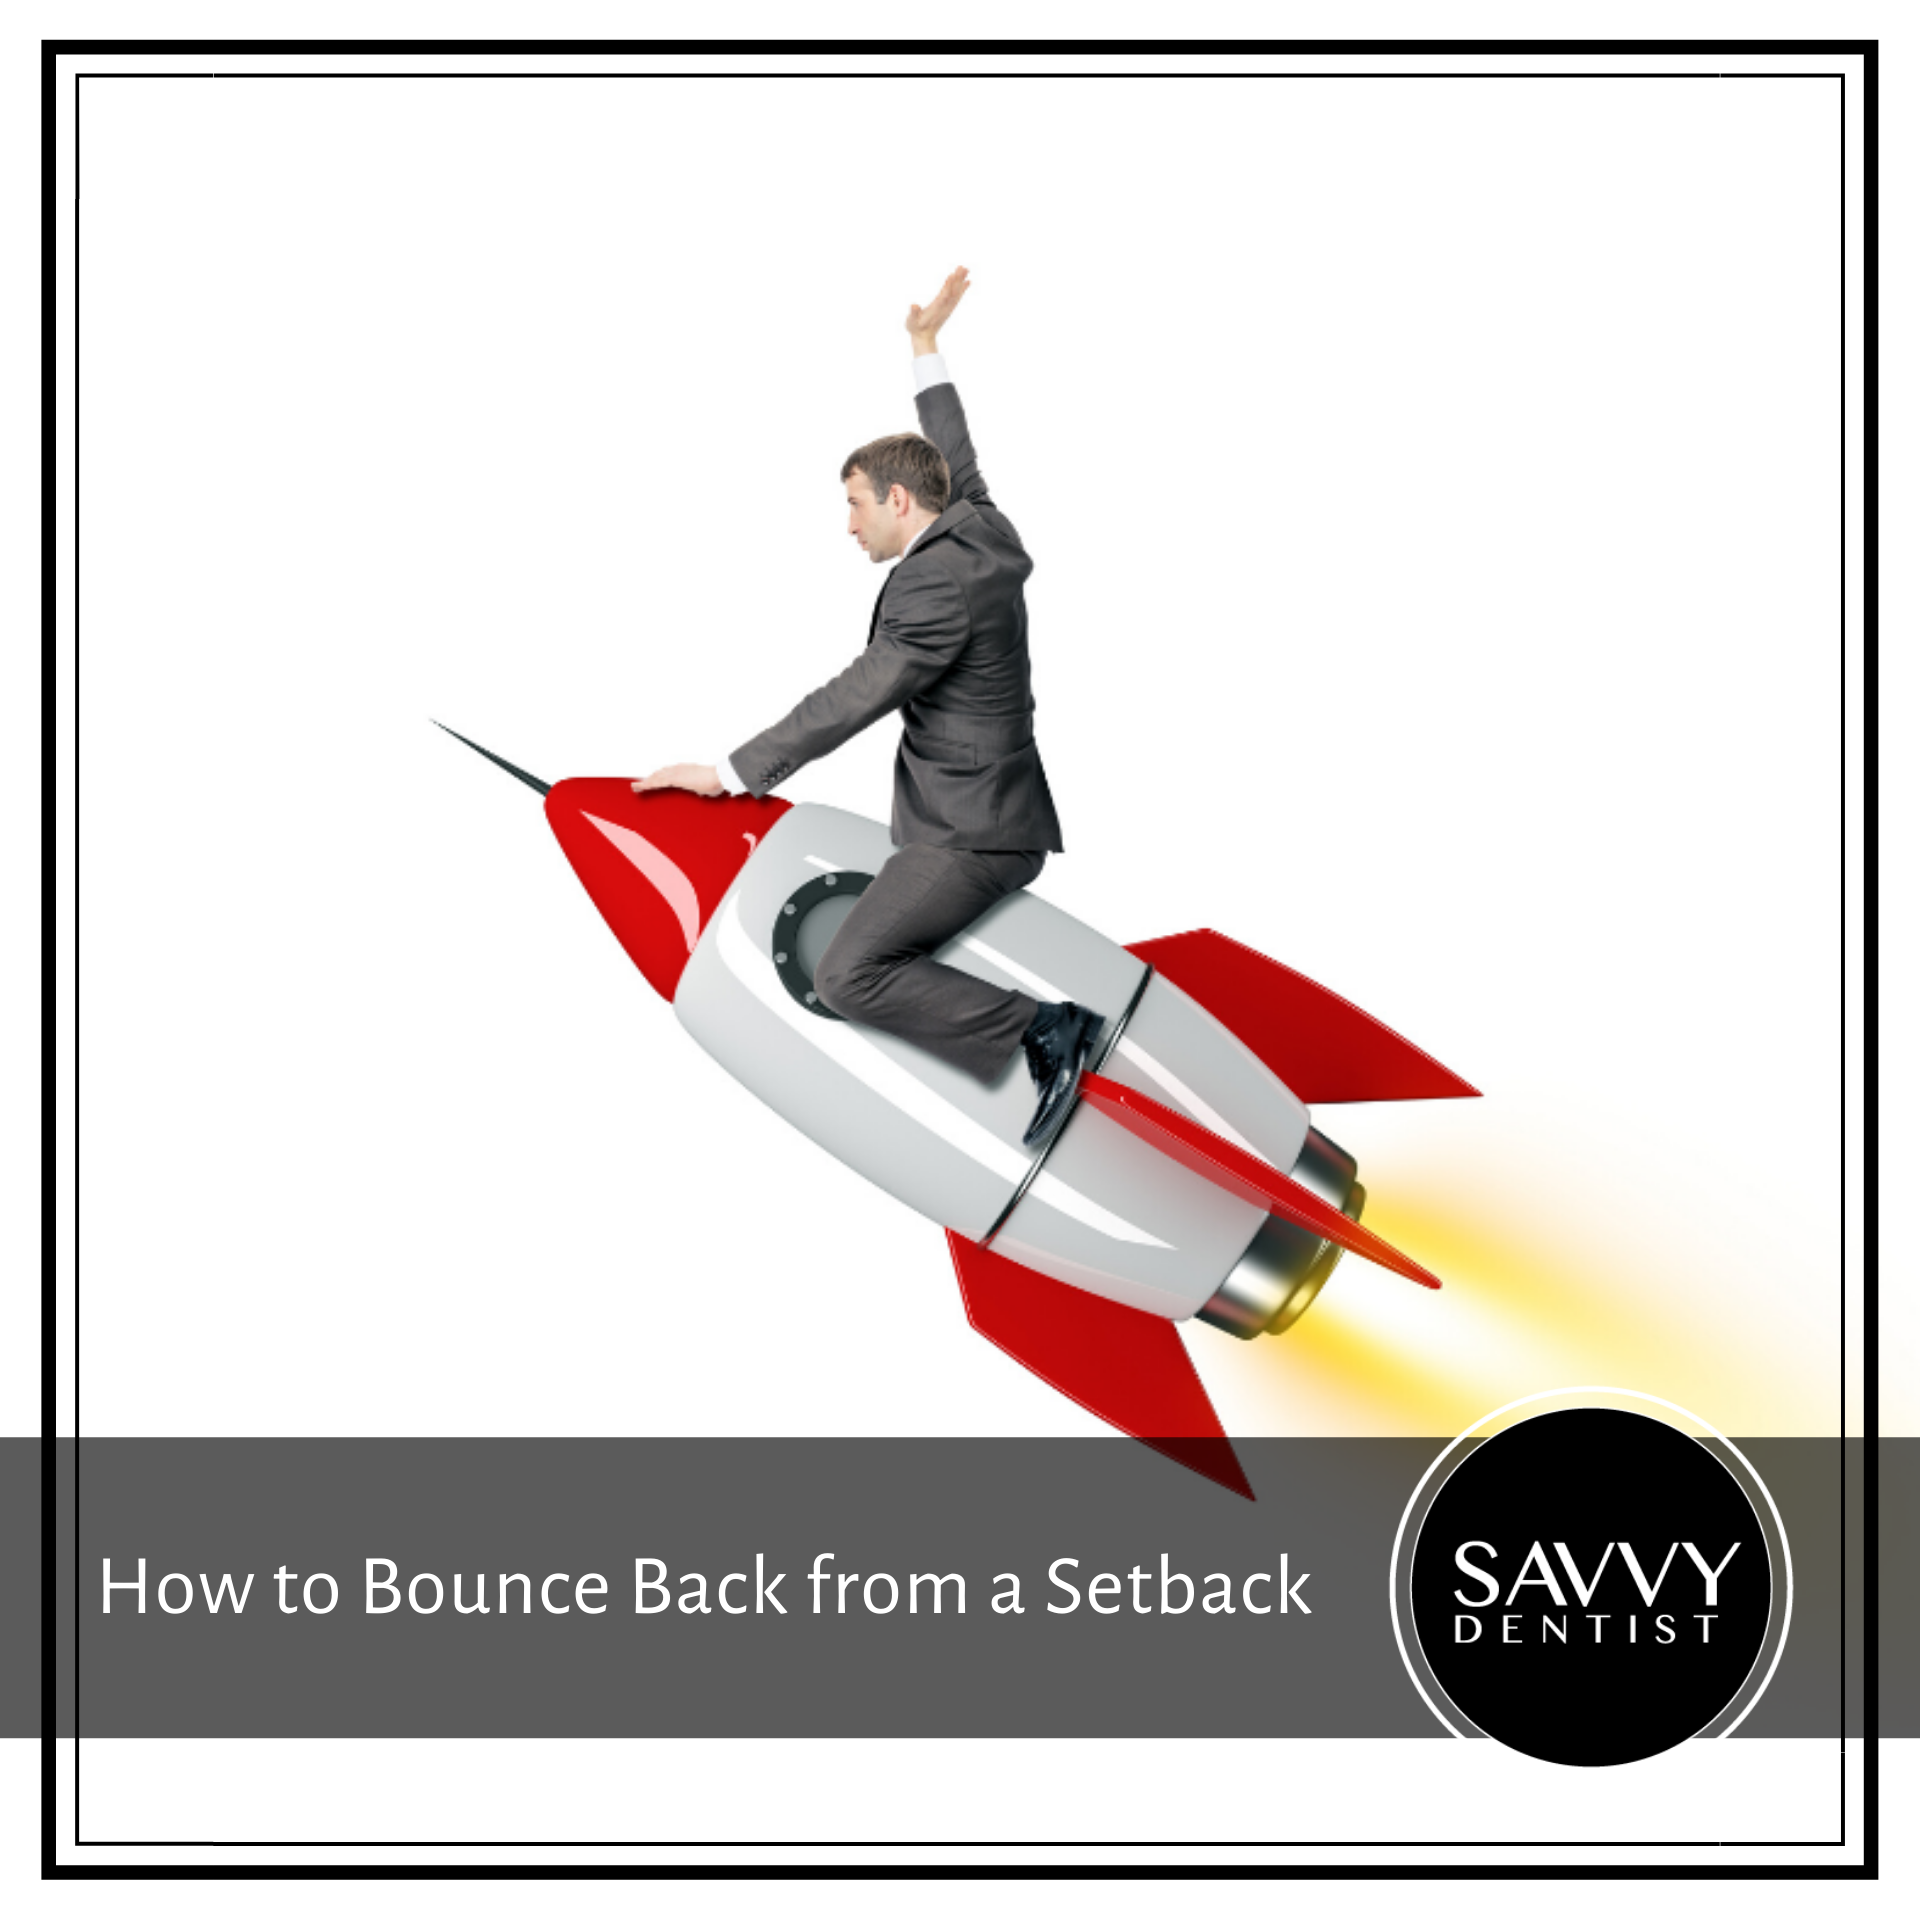 How to Bounce Back from a Setback